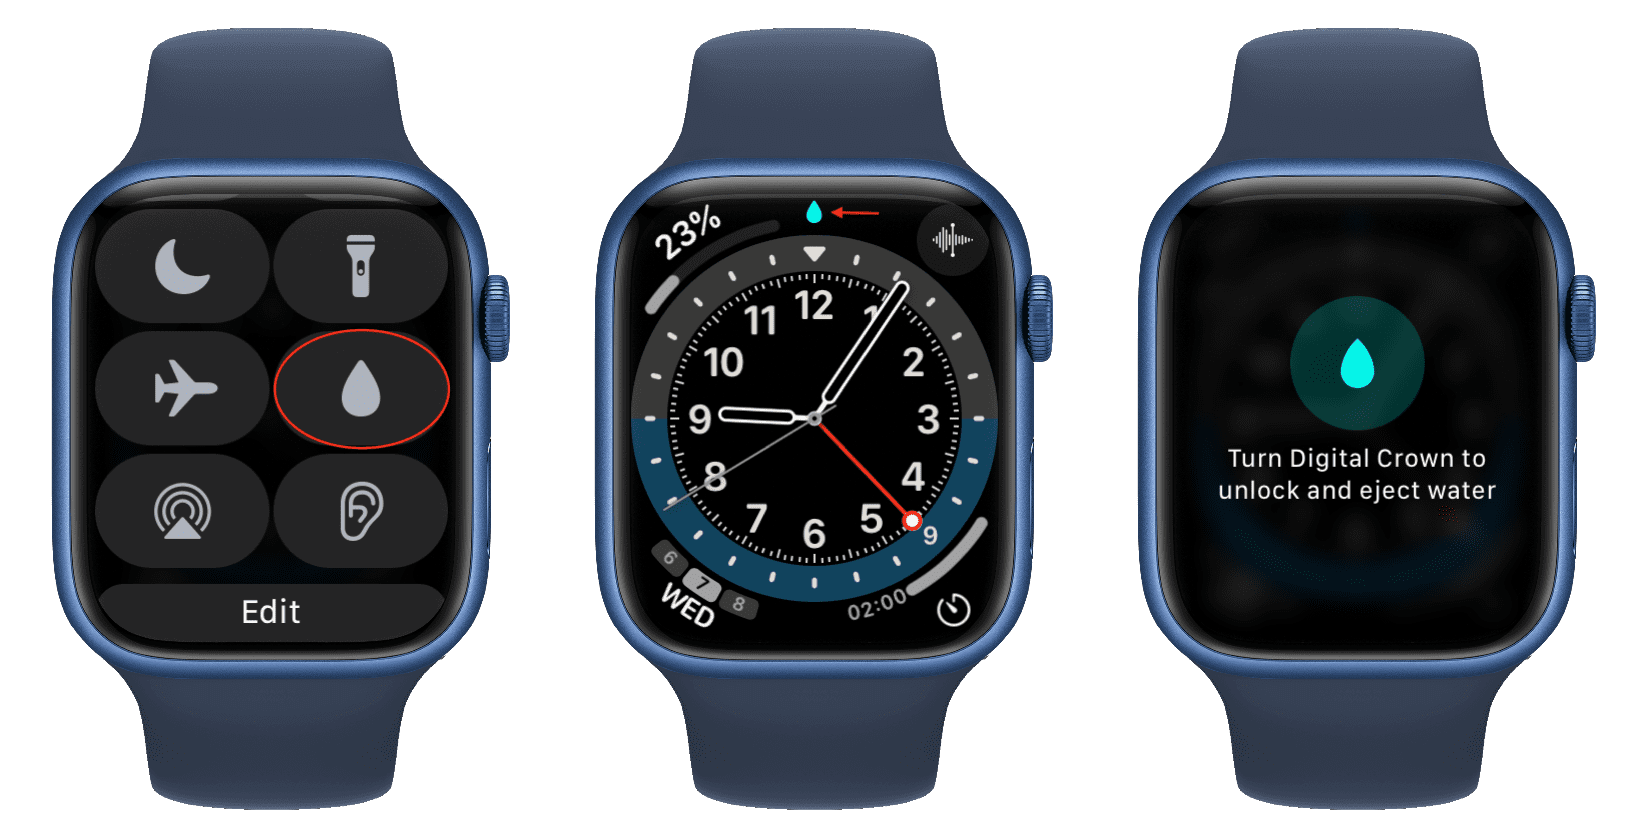 Three Apple Watch mockups showing how to eject water from Apple Watch